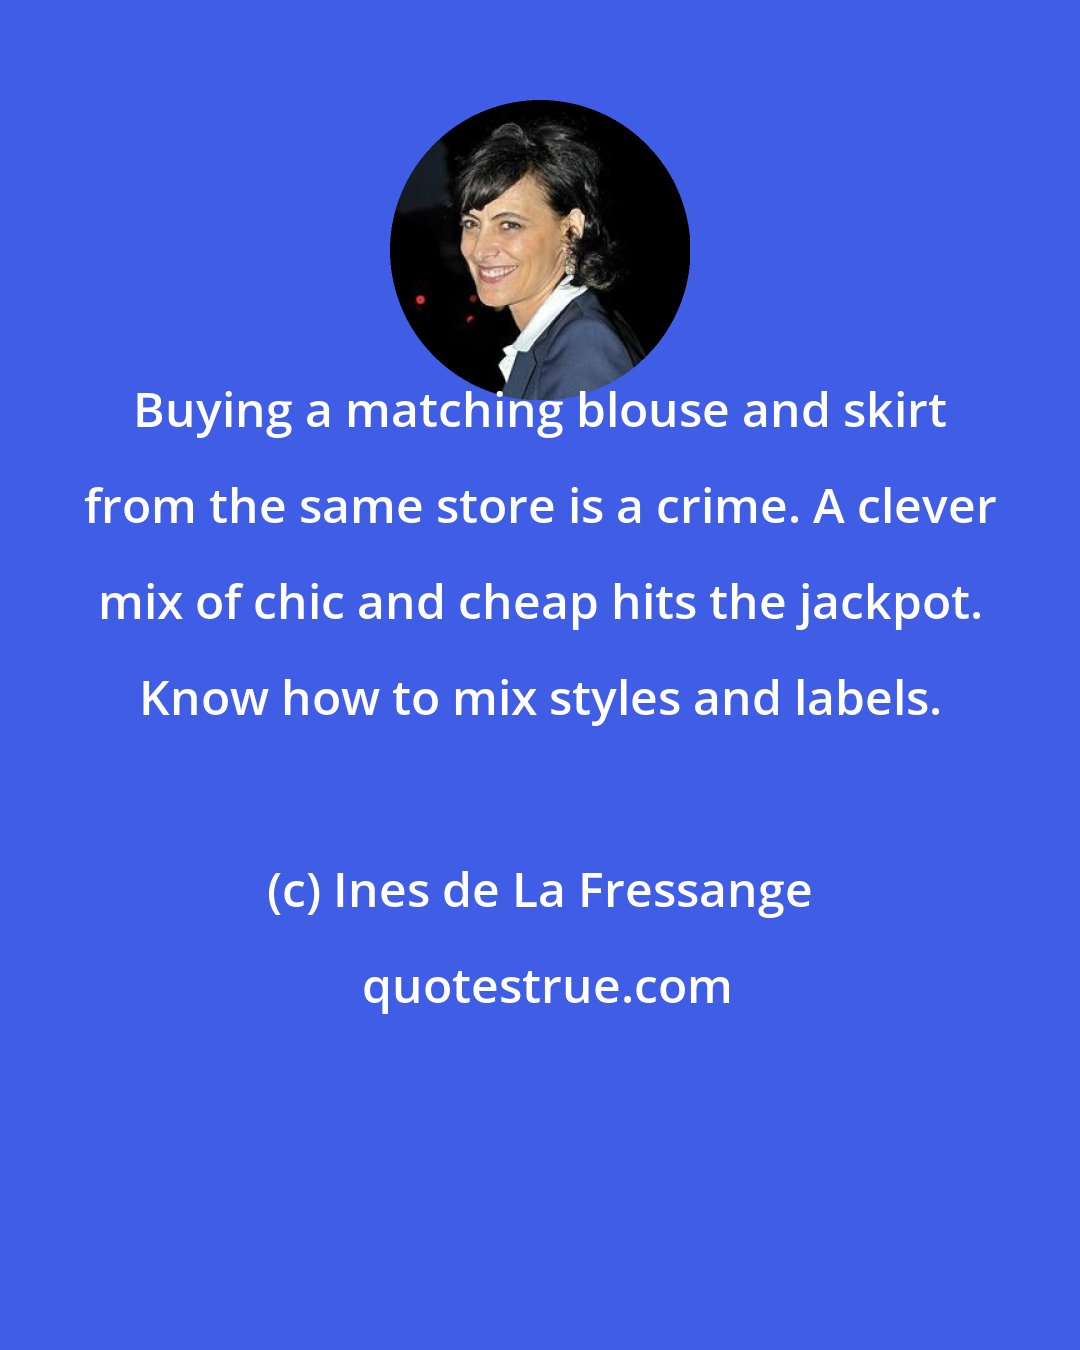 Ines de La Fressange: Buying a matching blouse and skirt from the same store is a crime. A clever mix of chic and cheap hits the jackpot. Know how to mix styles and labels.